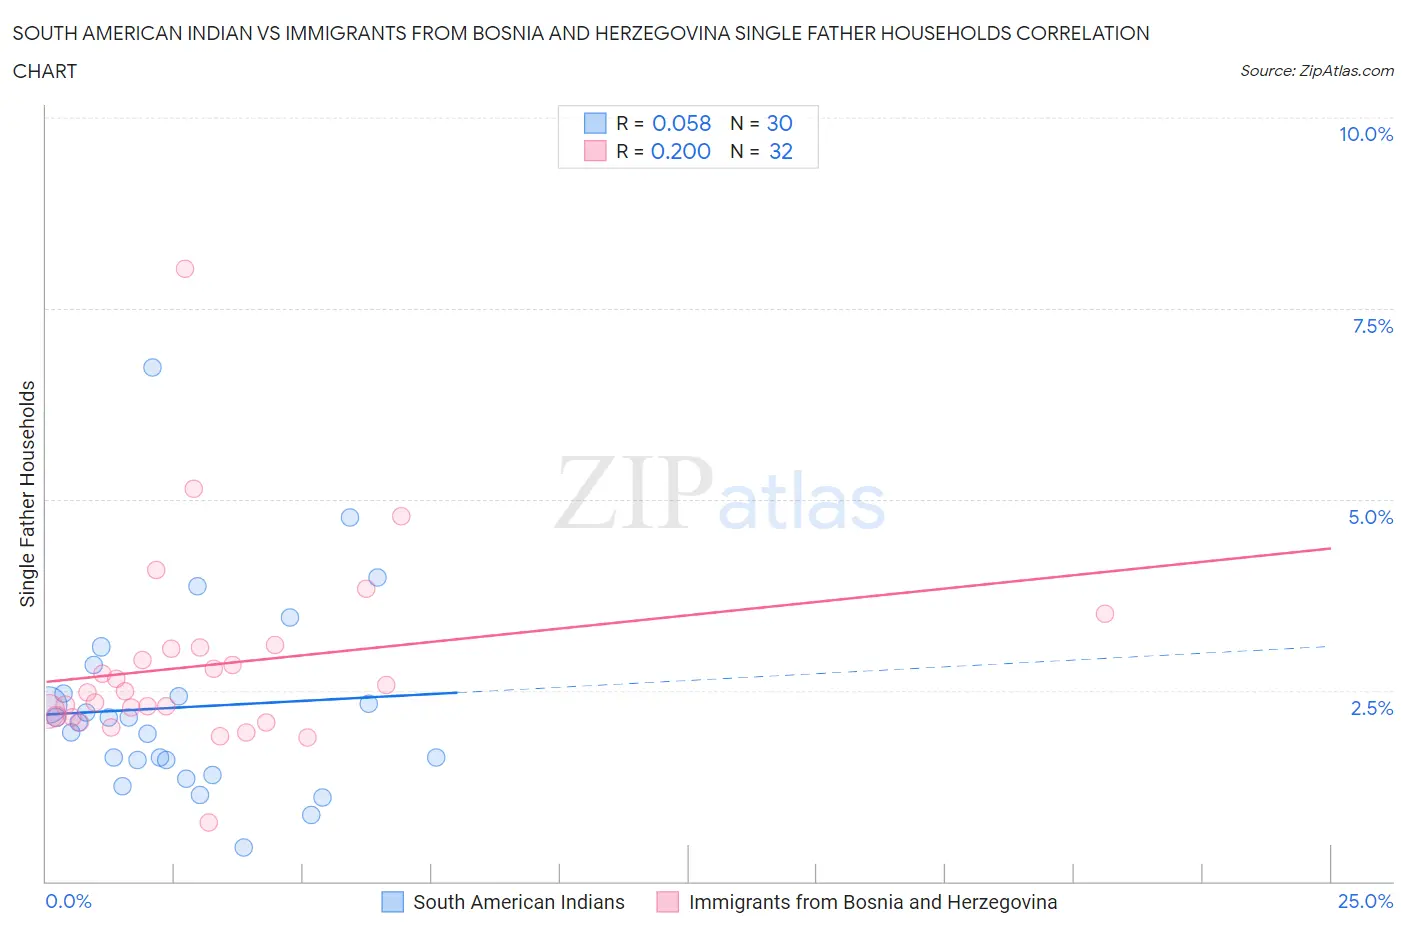 South American Indian vs Immigrants from Bosnia and Herzegovina Single Father Households